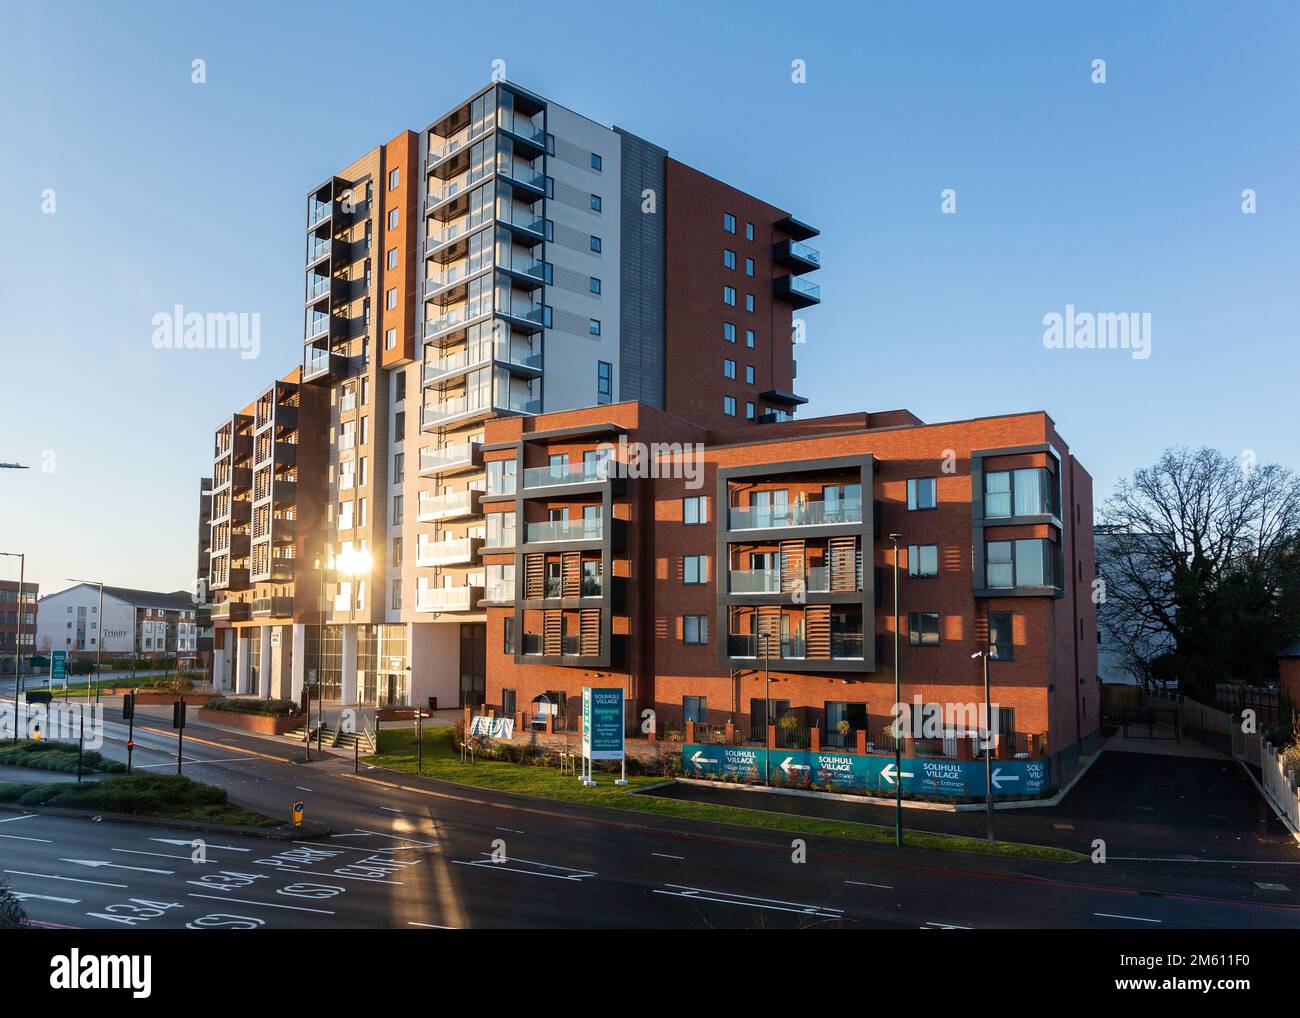 Shirley, UK: Solihull Village, Stratford Road. A retirement and assisted living facility on the former Powergen site. Stock Photo